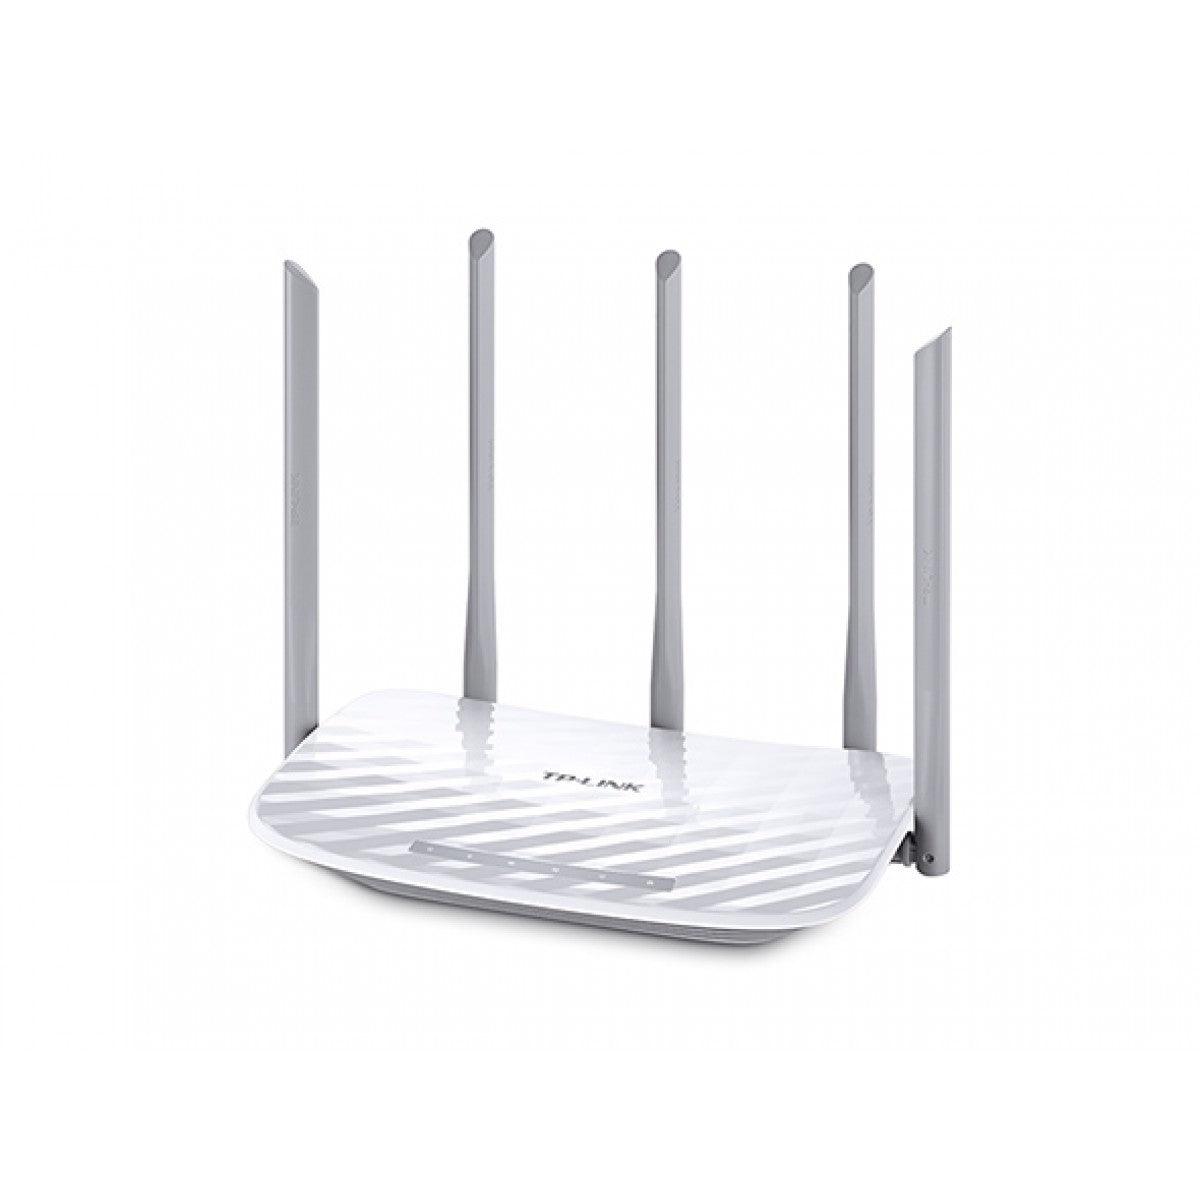 TP Link AC1350 Wireless Dual Band Cable Router - White | ARCHER C60 from DID Electrical - guaranteed Irish, guaranteed quality service. (6890771218620)